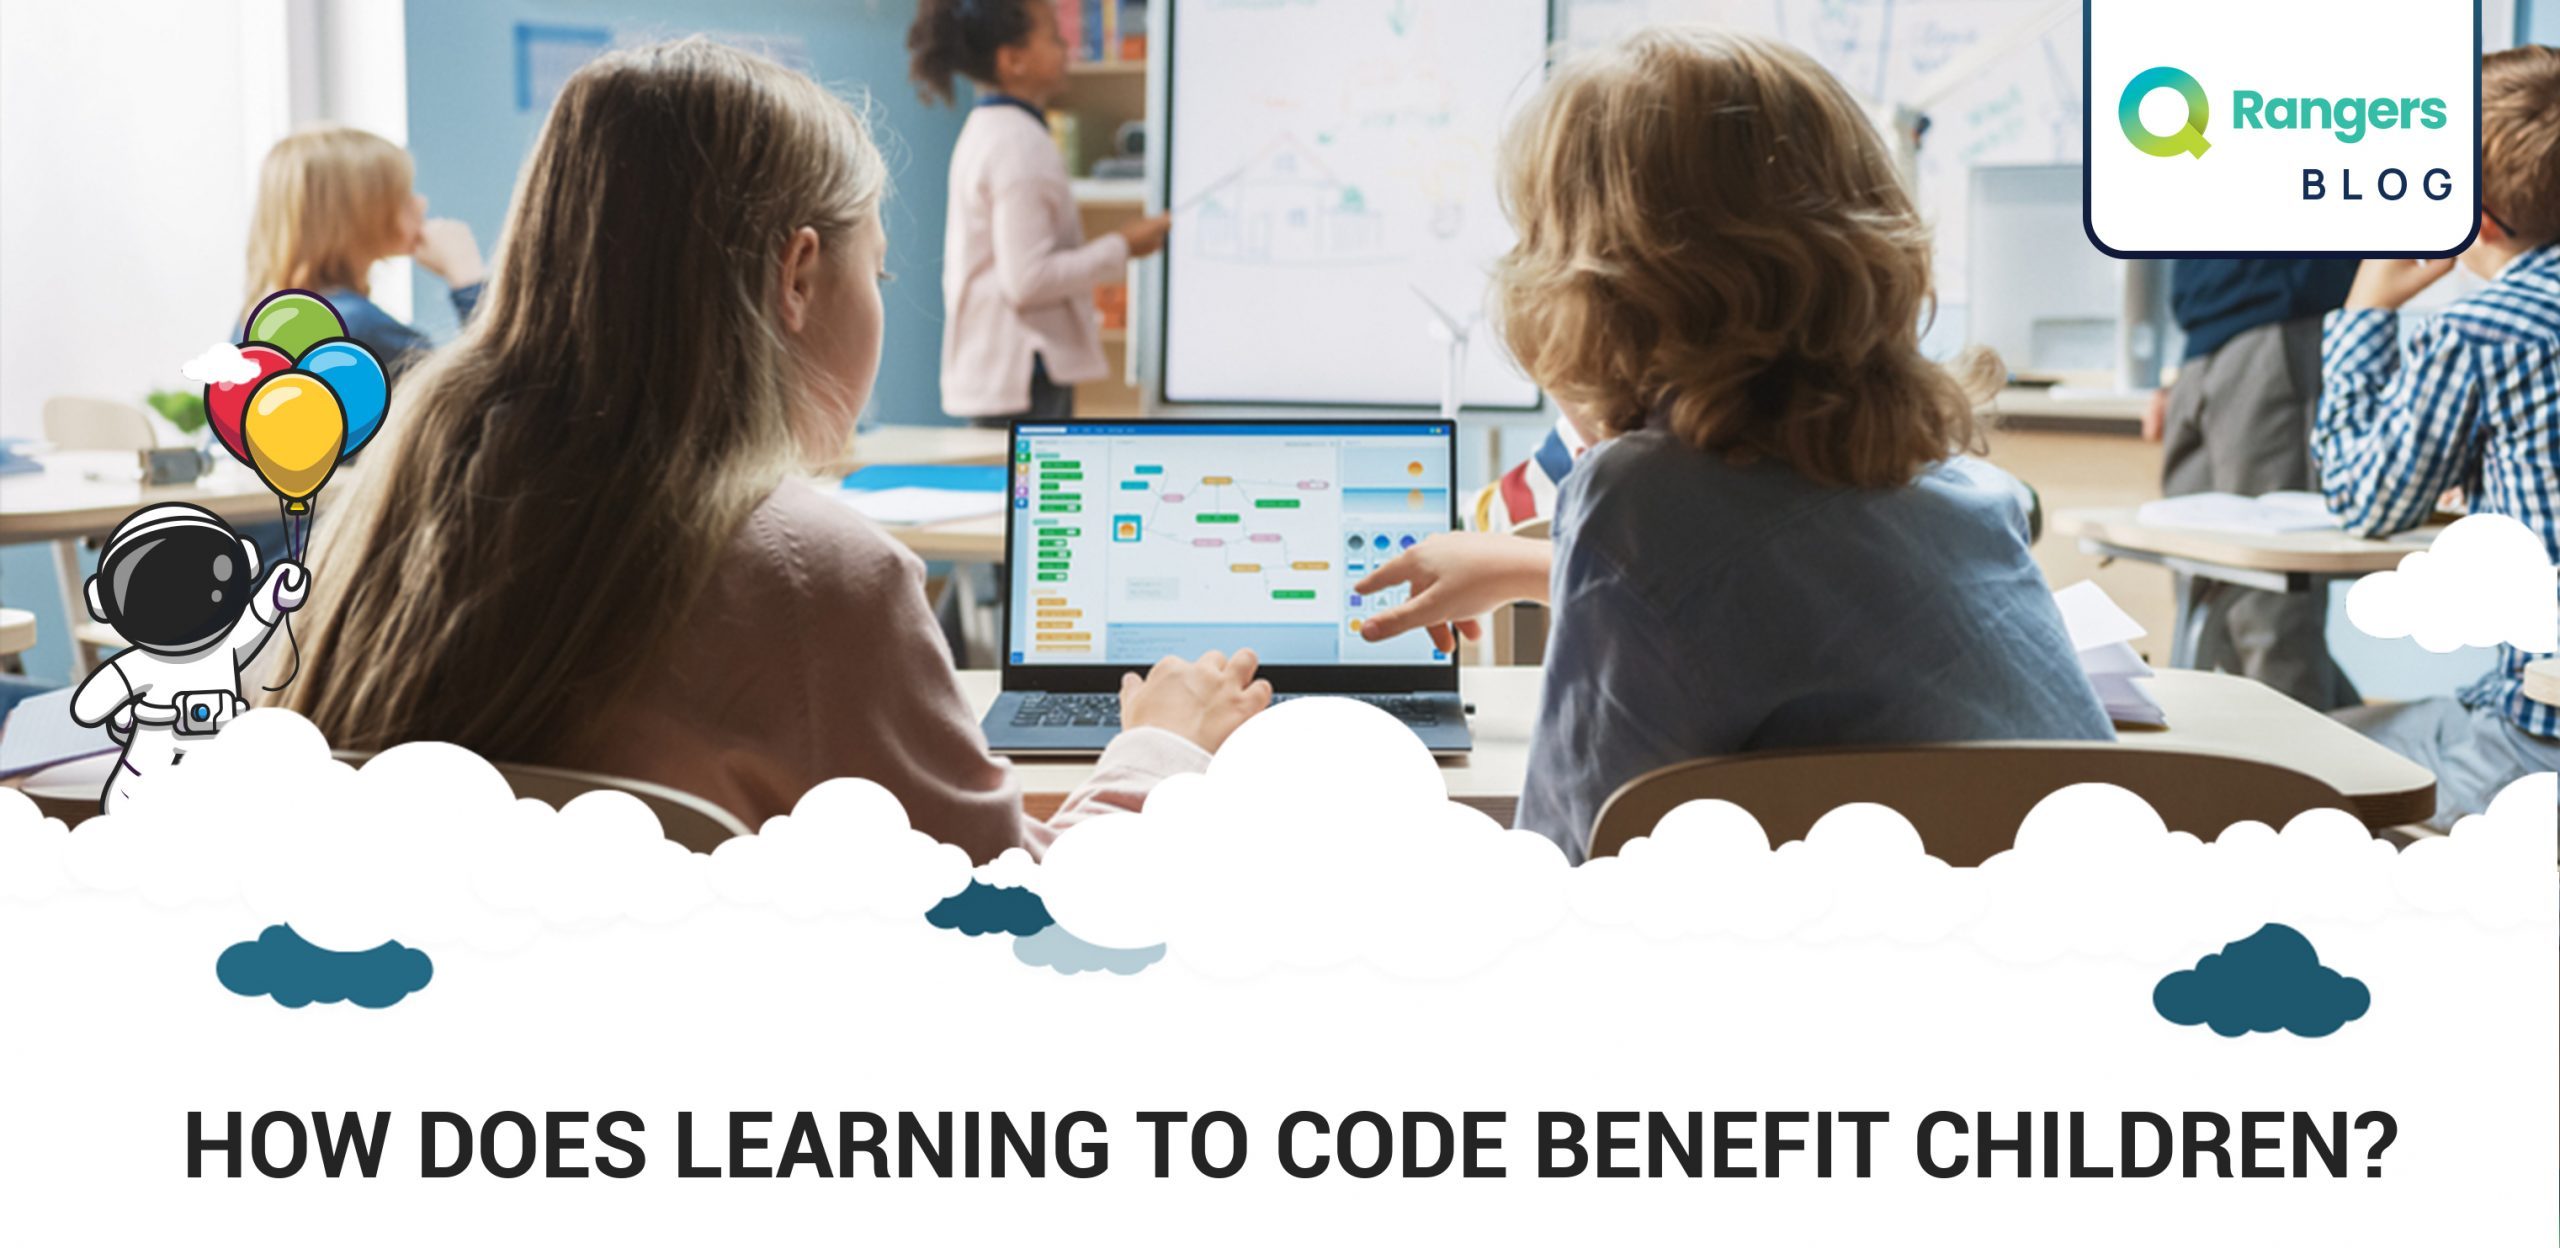 how does learning to code benefit children? - q rangers